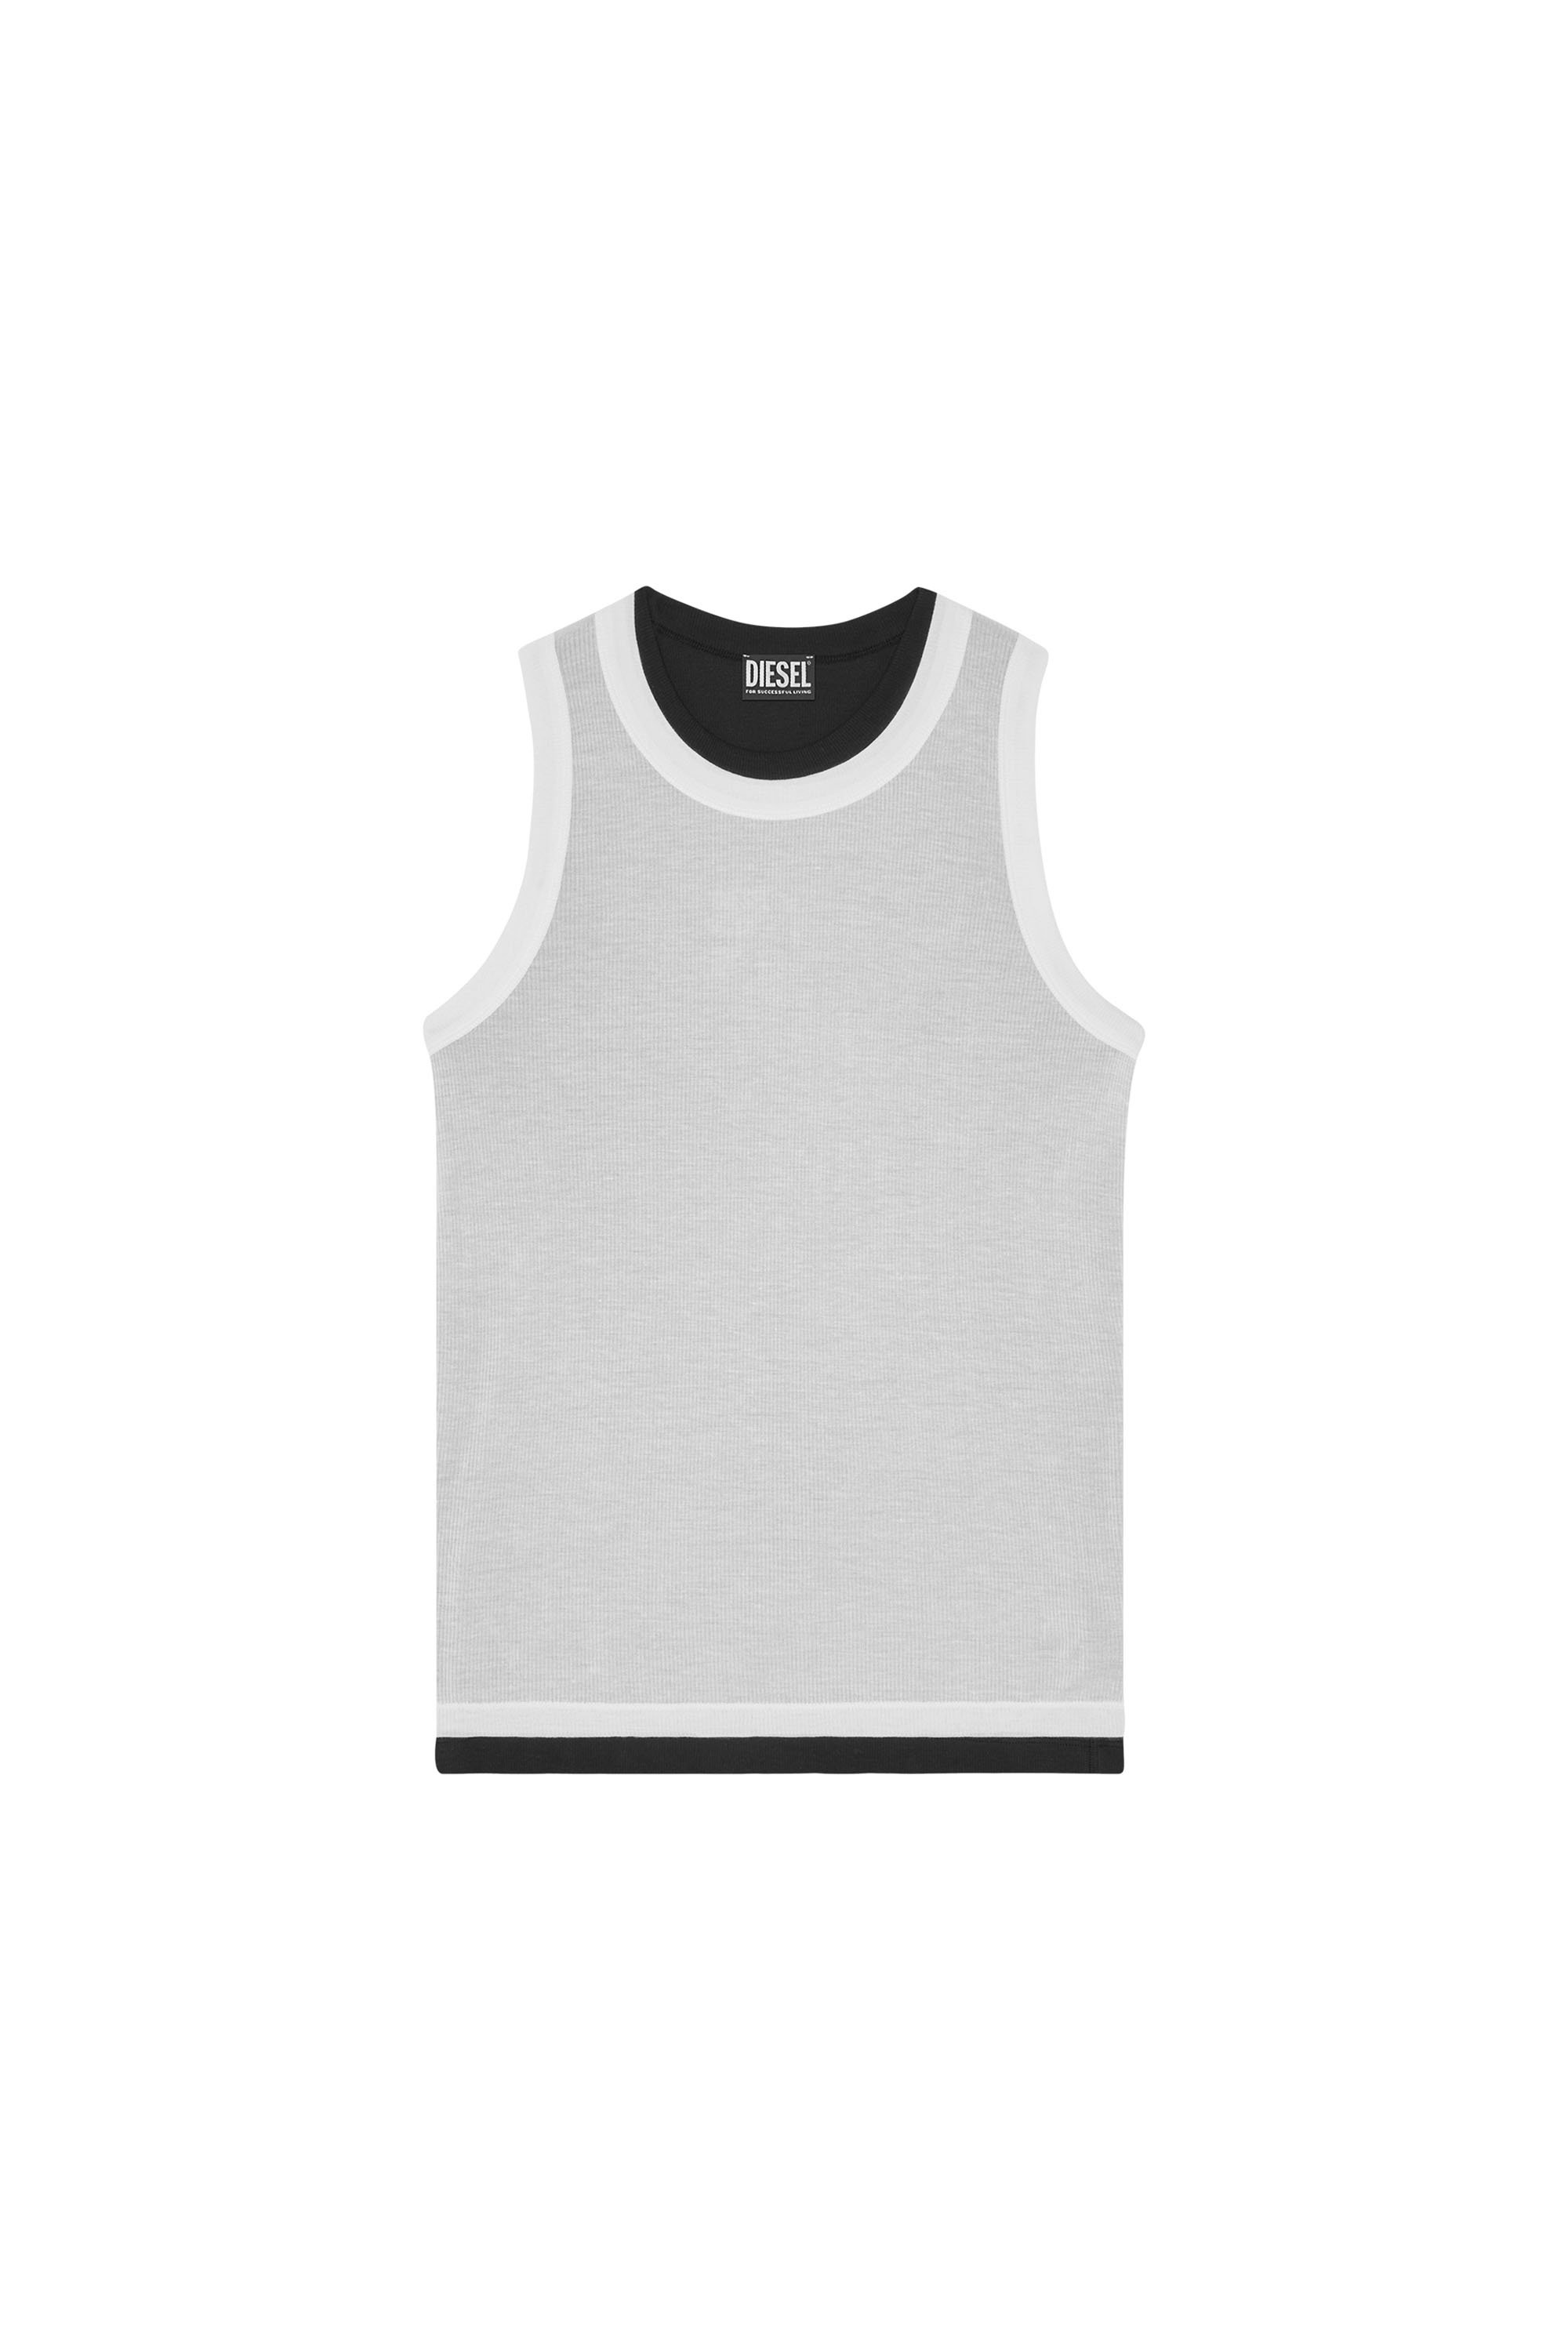 Diesel - T-DOUBLY, White - Image 5